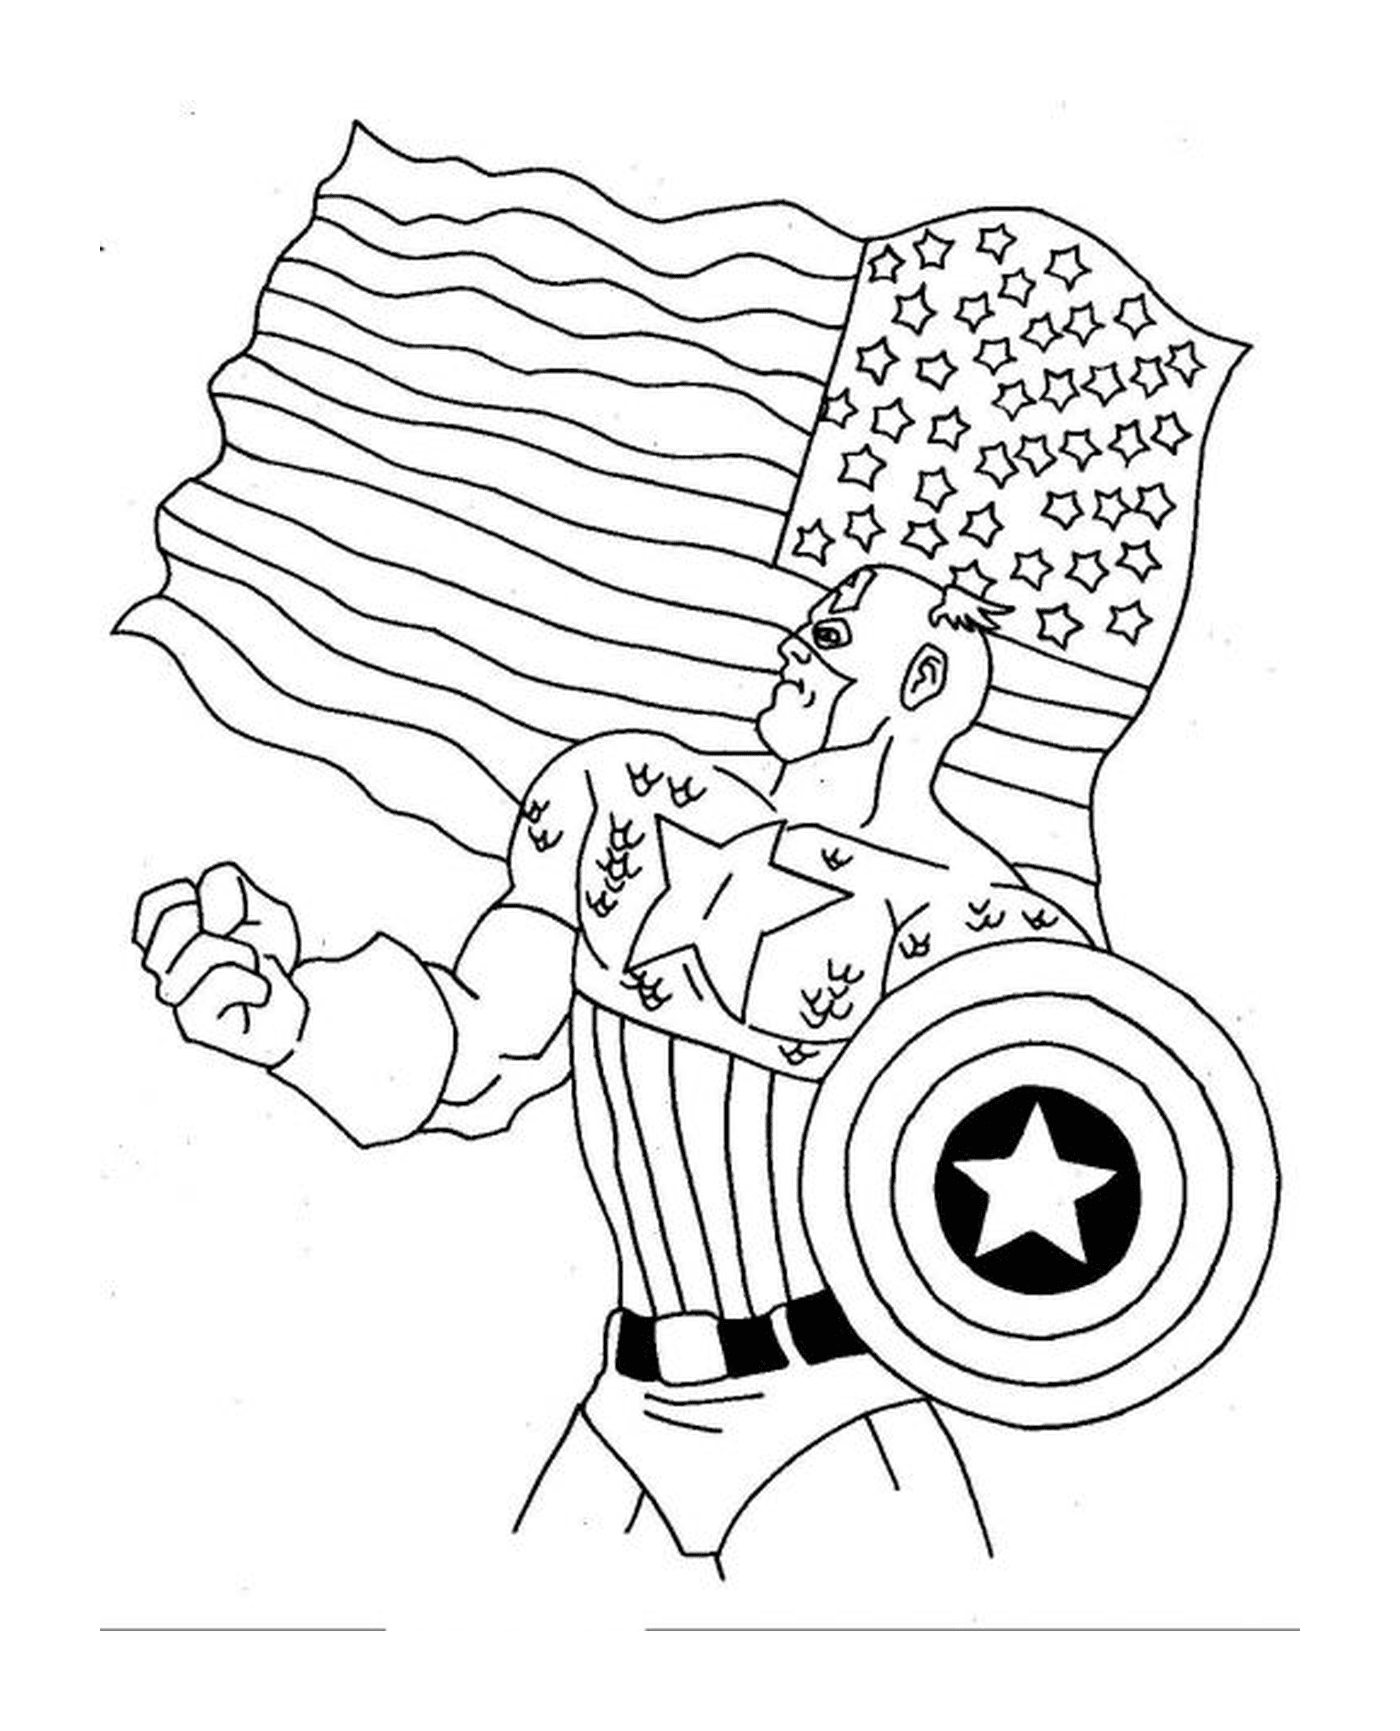  Captain America with an American flag 